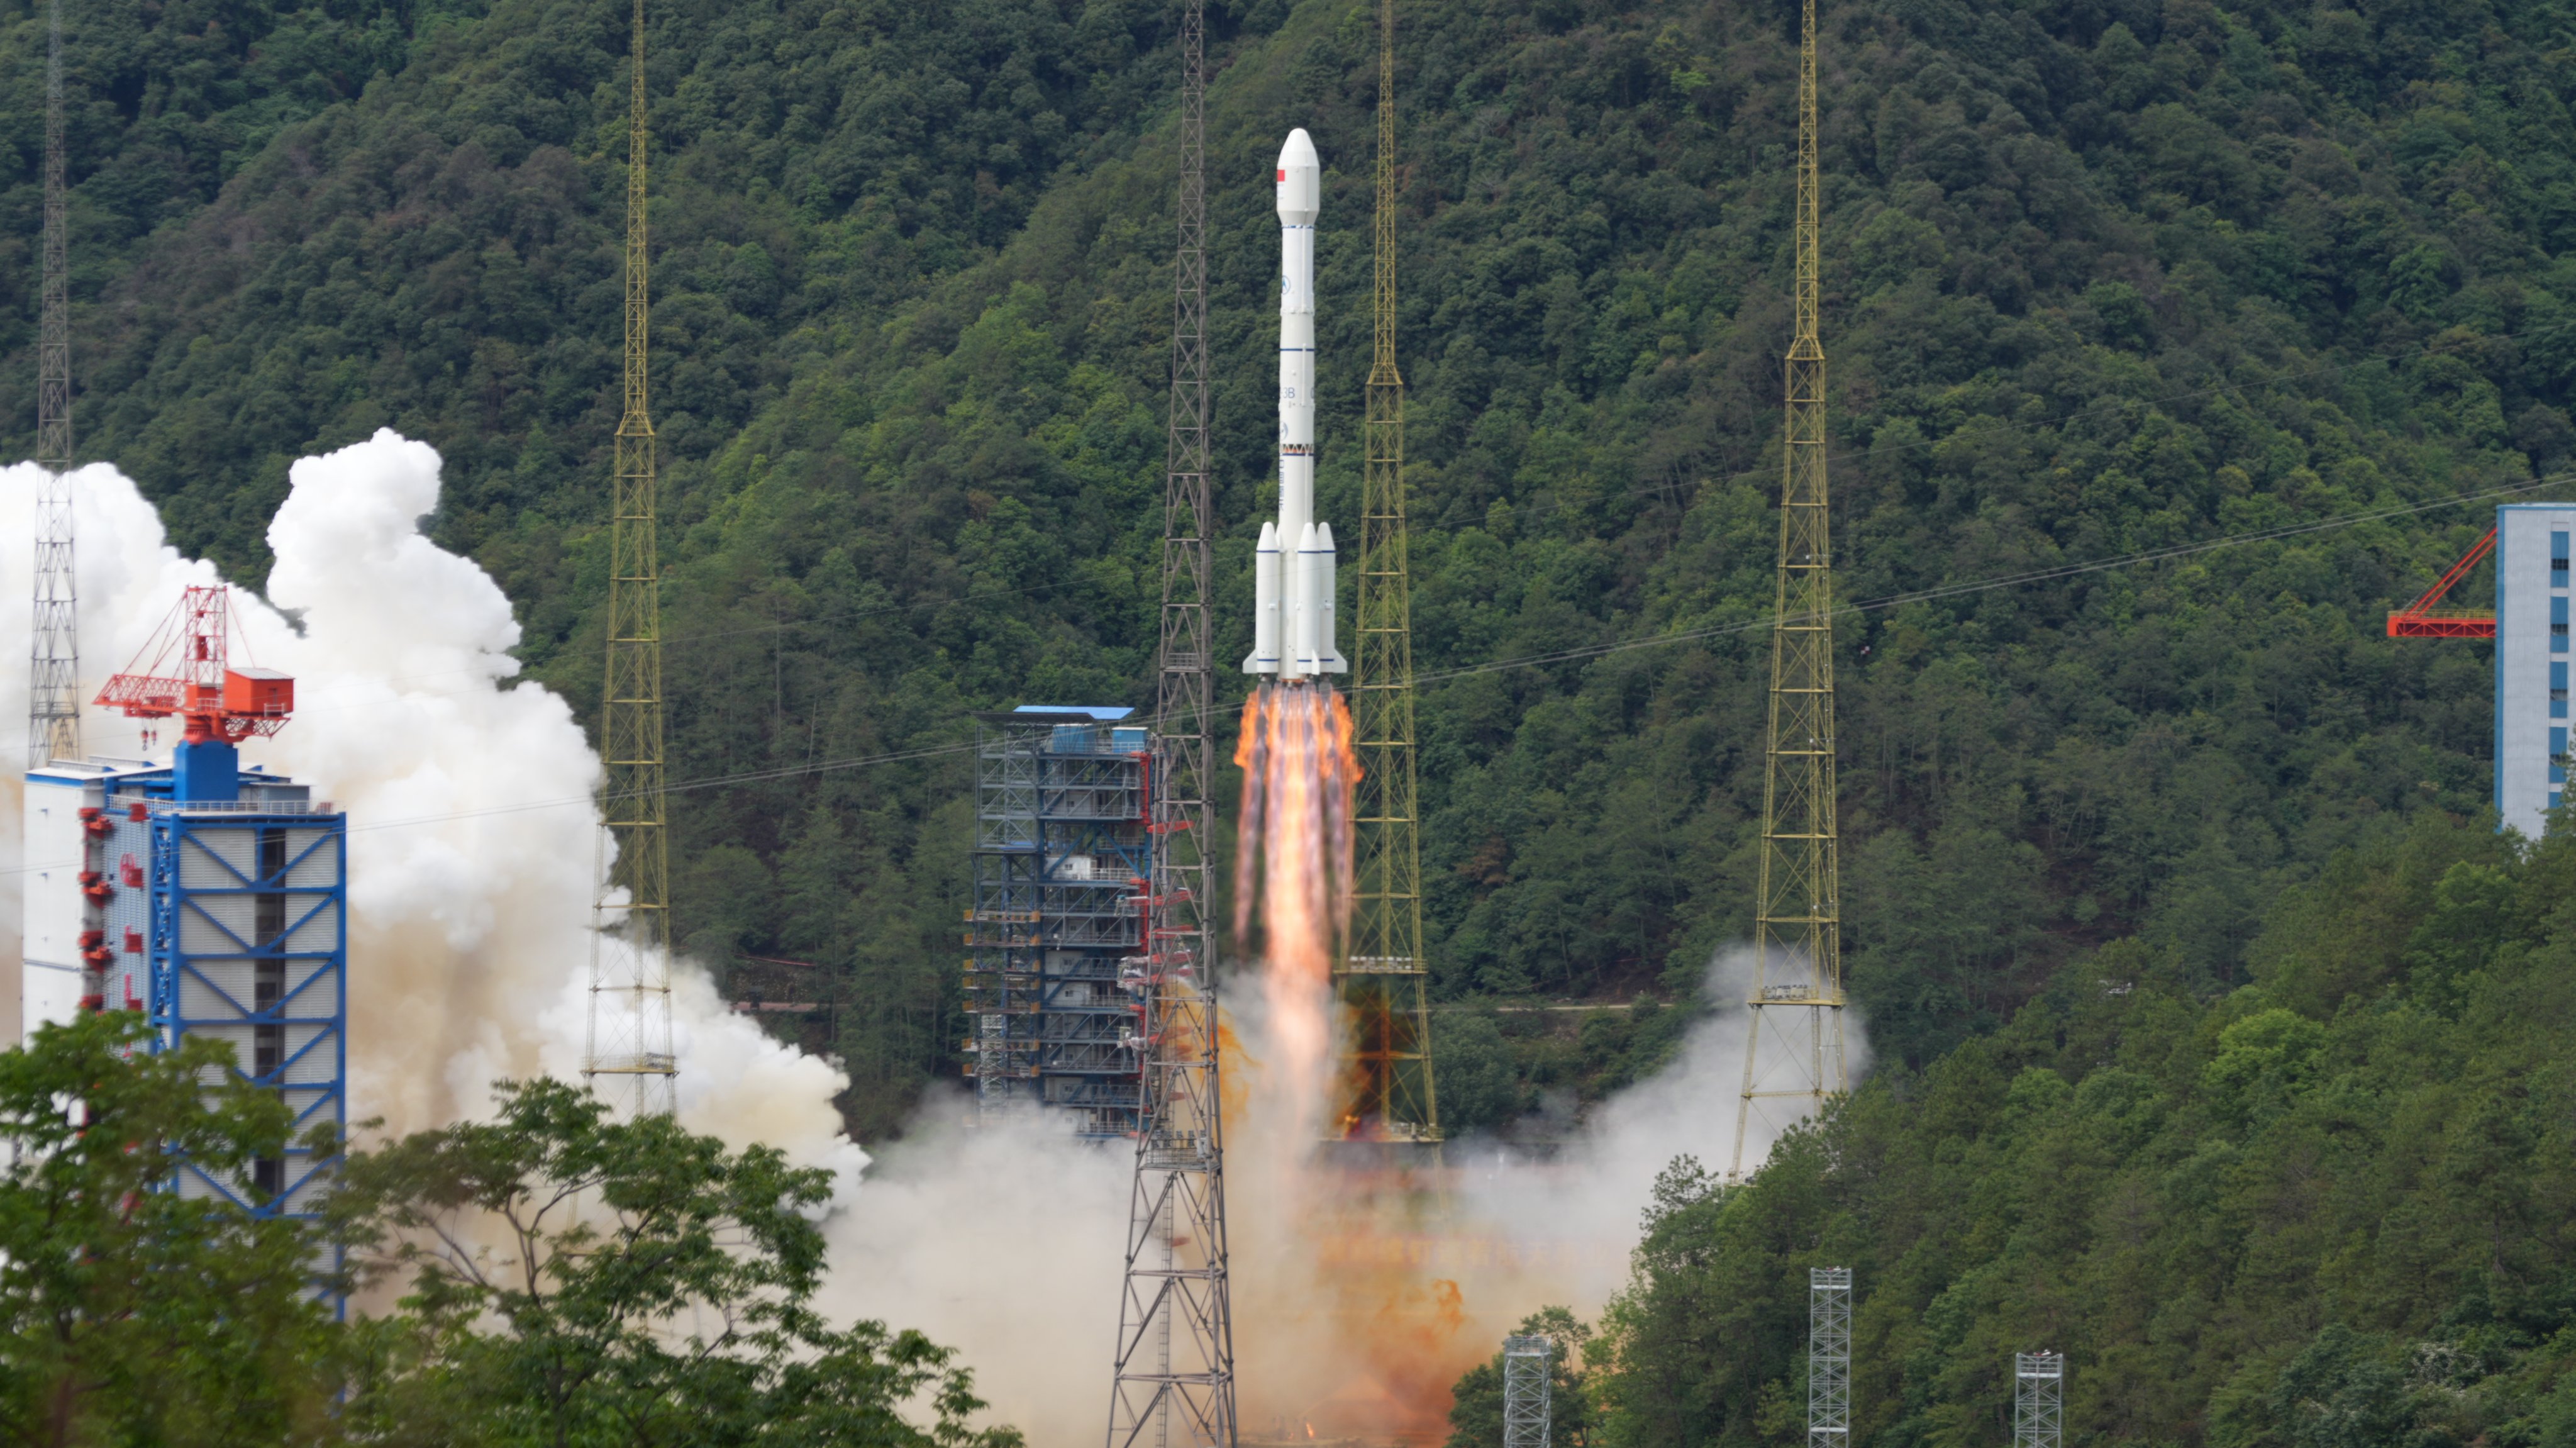 A Long March-3B rocket carrying the Smart SkyNet-1 01 satellite blasts off from the Xichang Satellite Launch Centre in Sichuan province, southwestern China, on Thursday. Photo: Xinhua